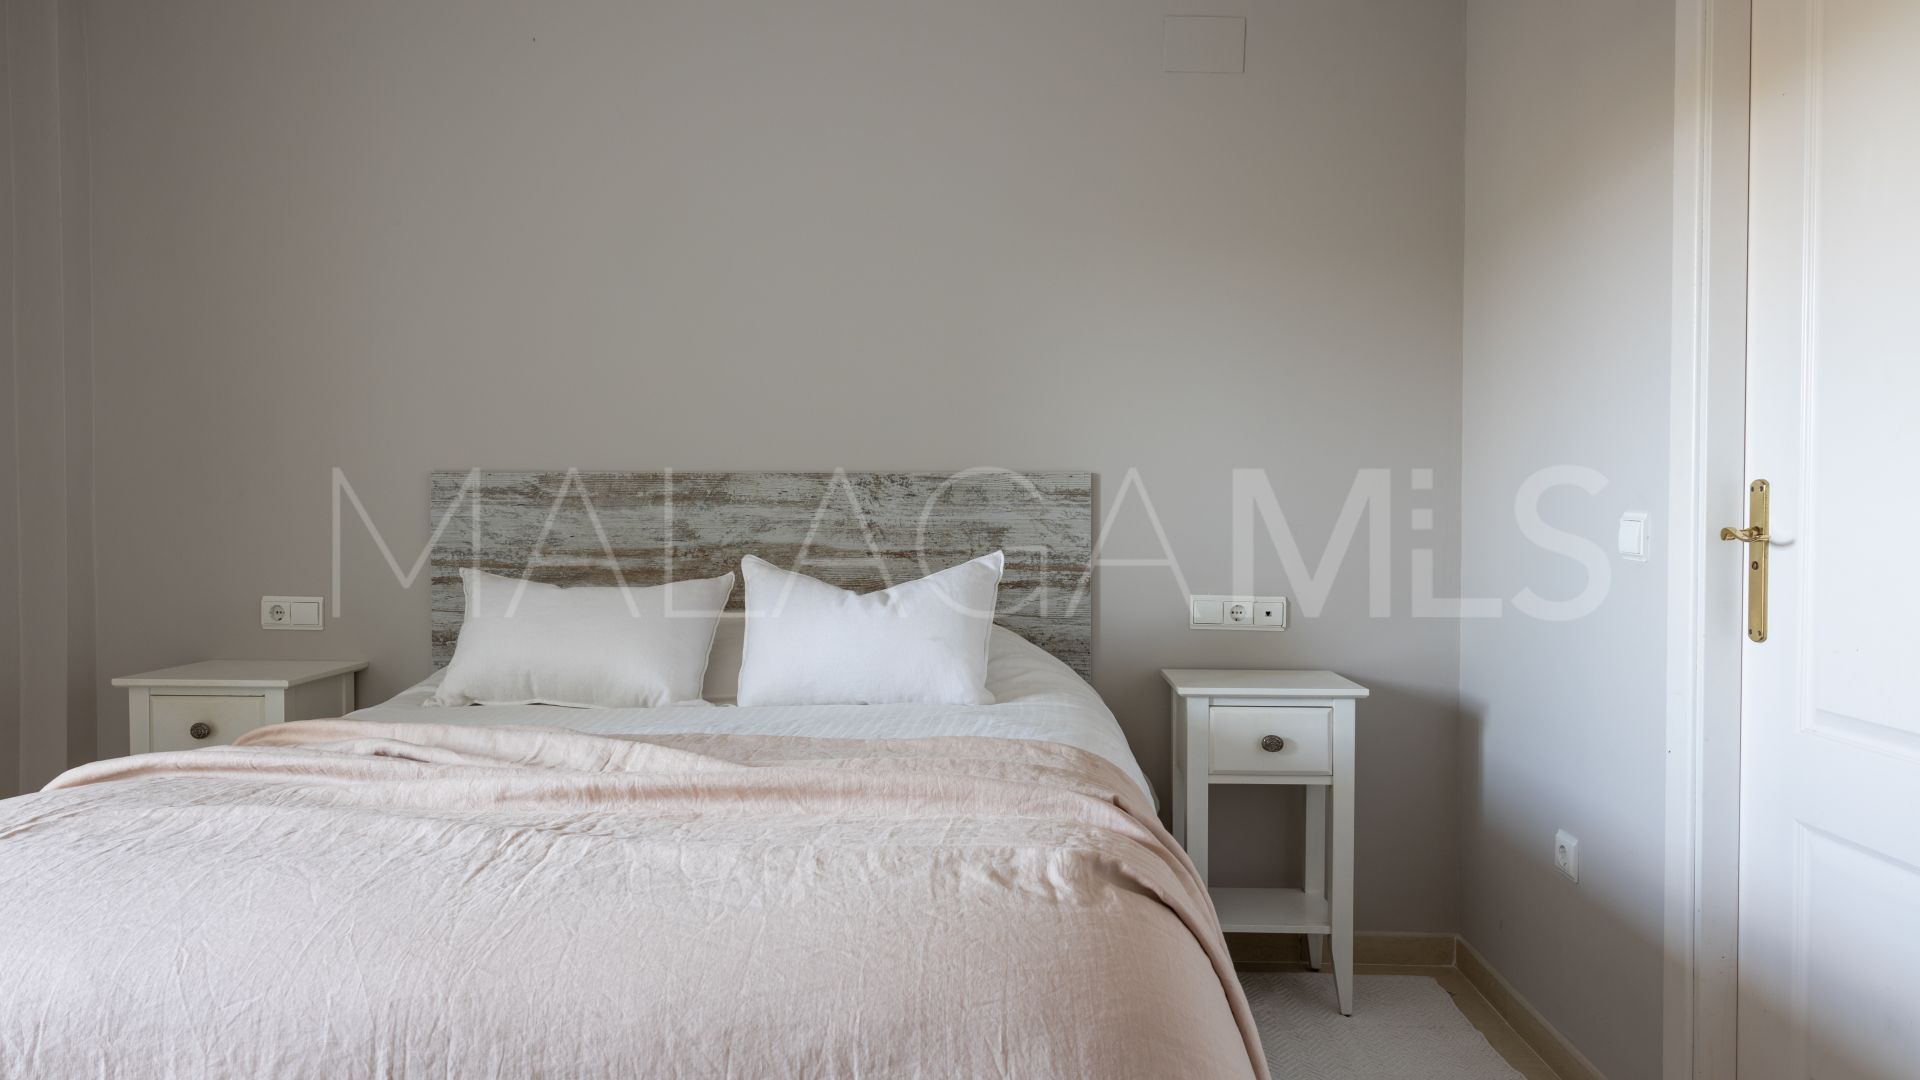 For sale ground floor apartment in Miraflores with 2 bedrooms